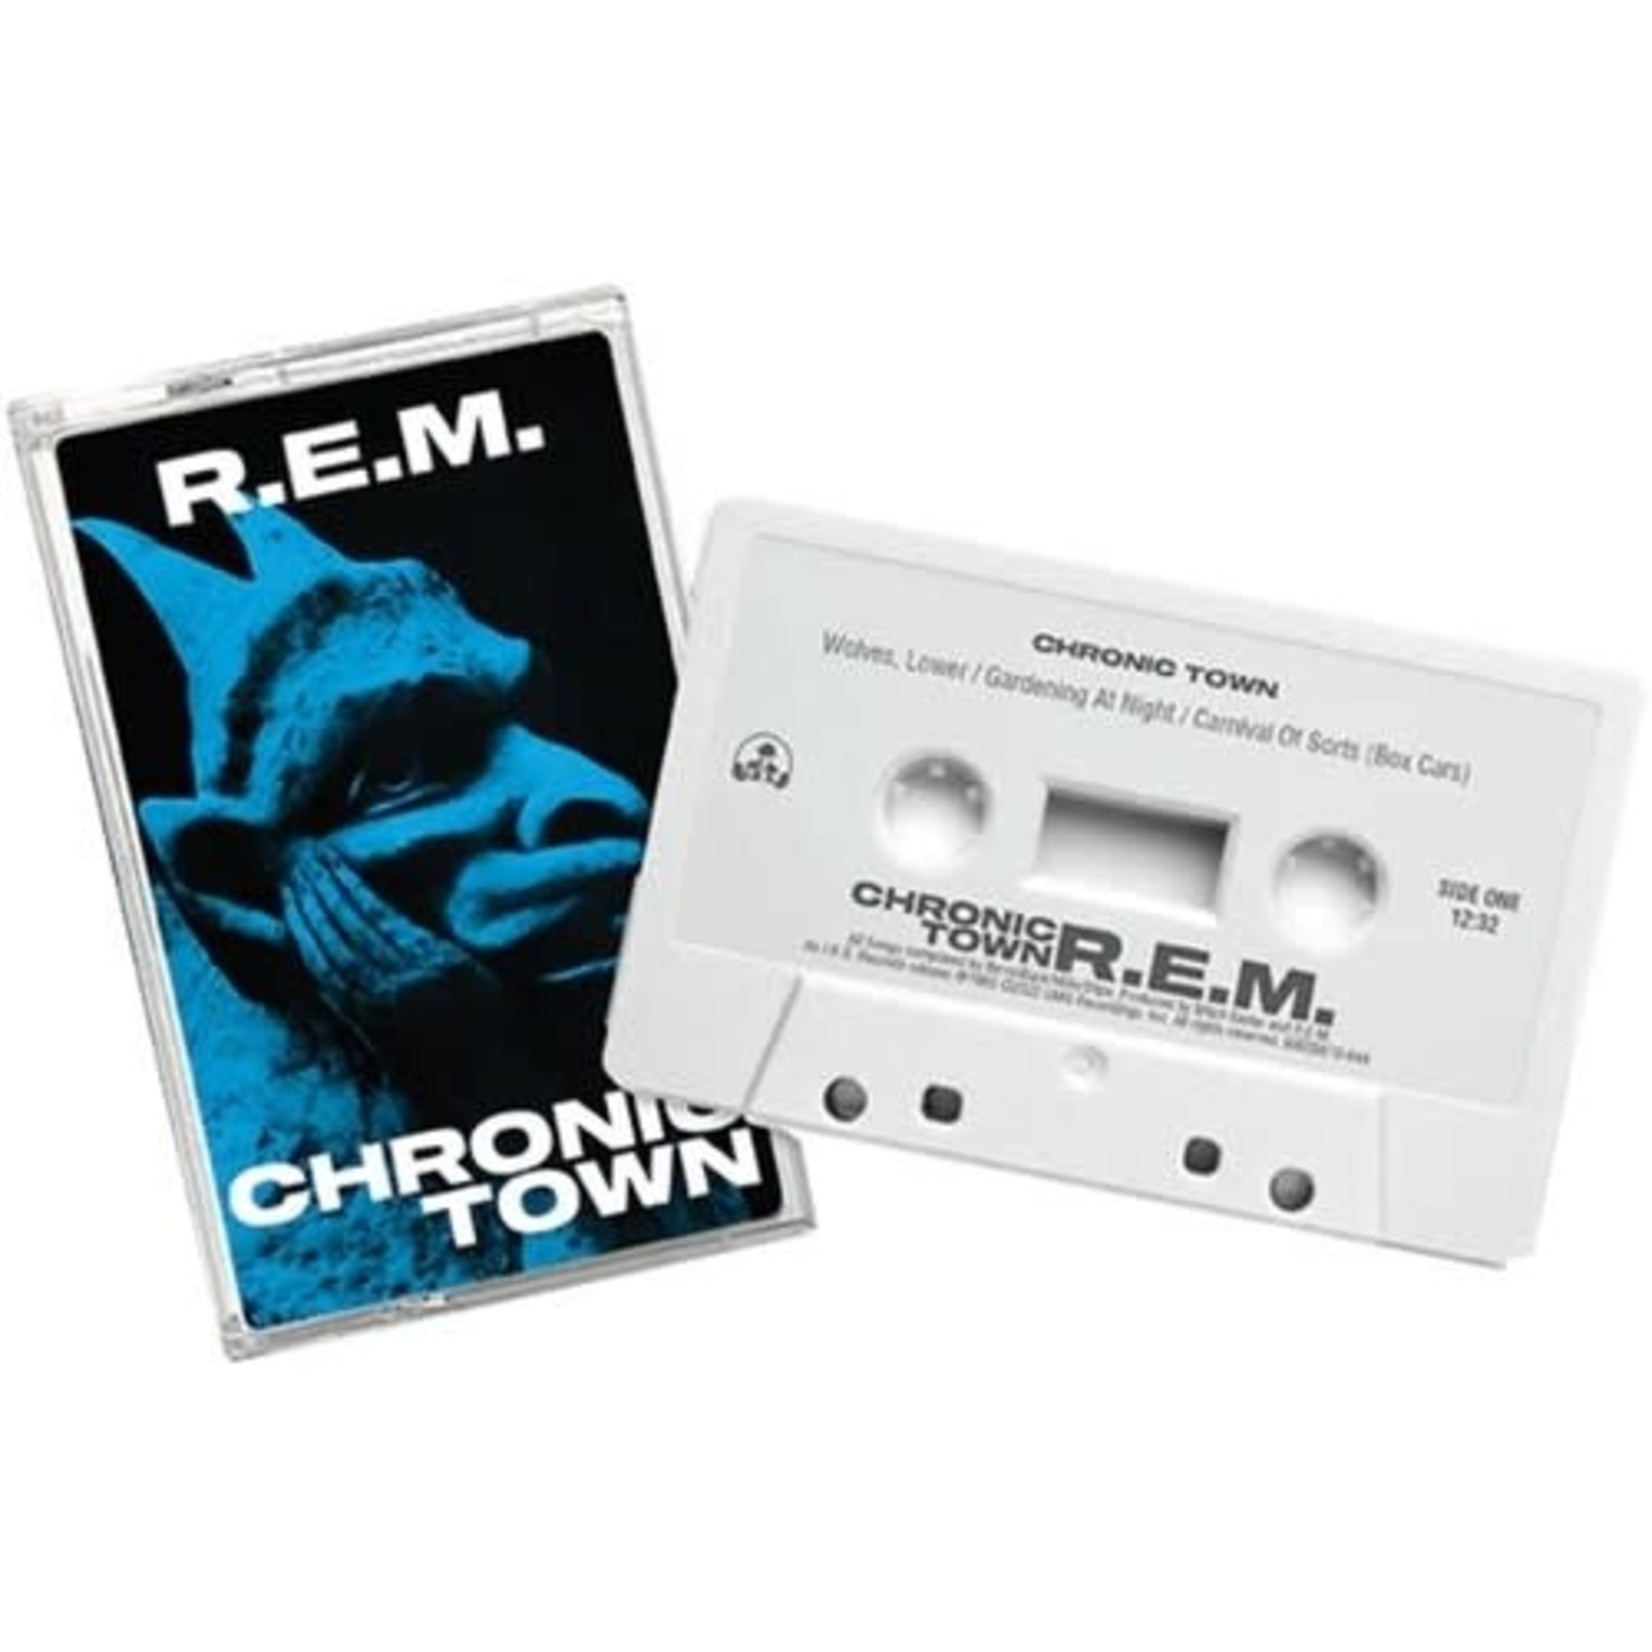 IRS REM - Chronic Town (Tape)